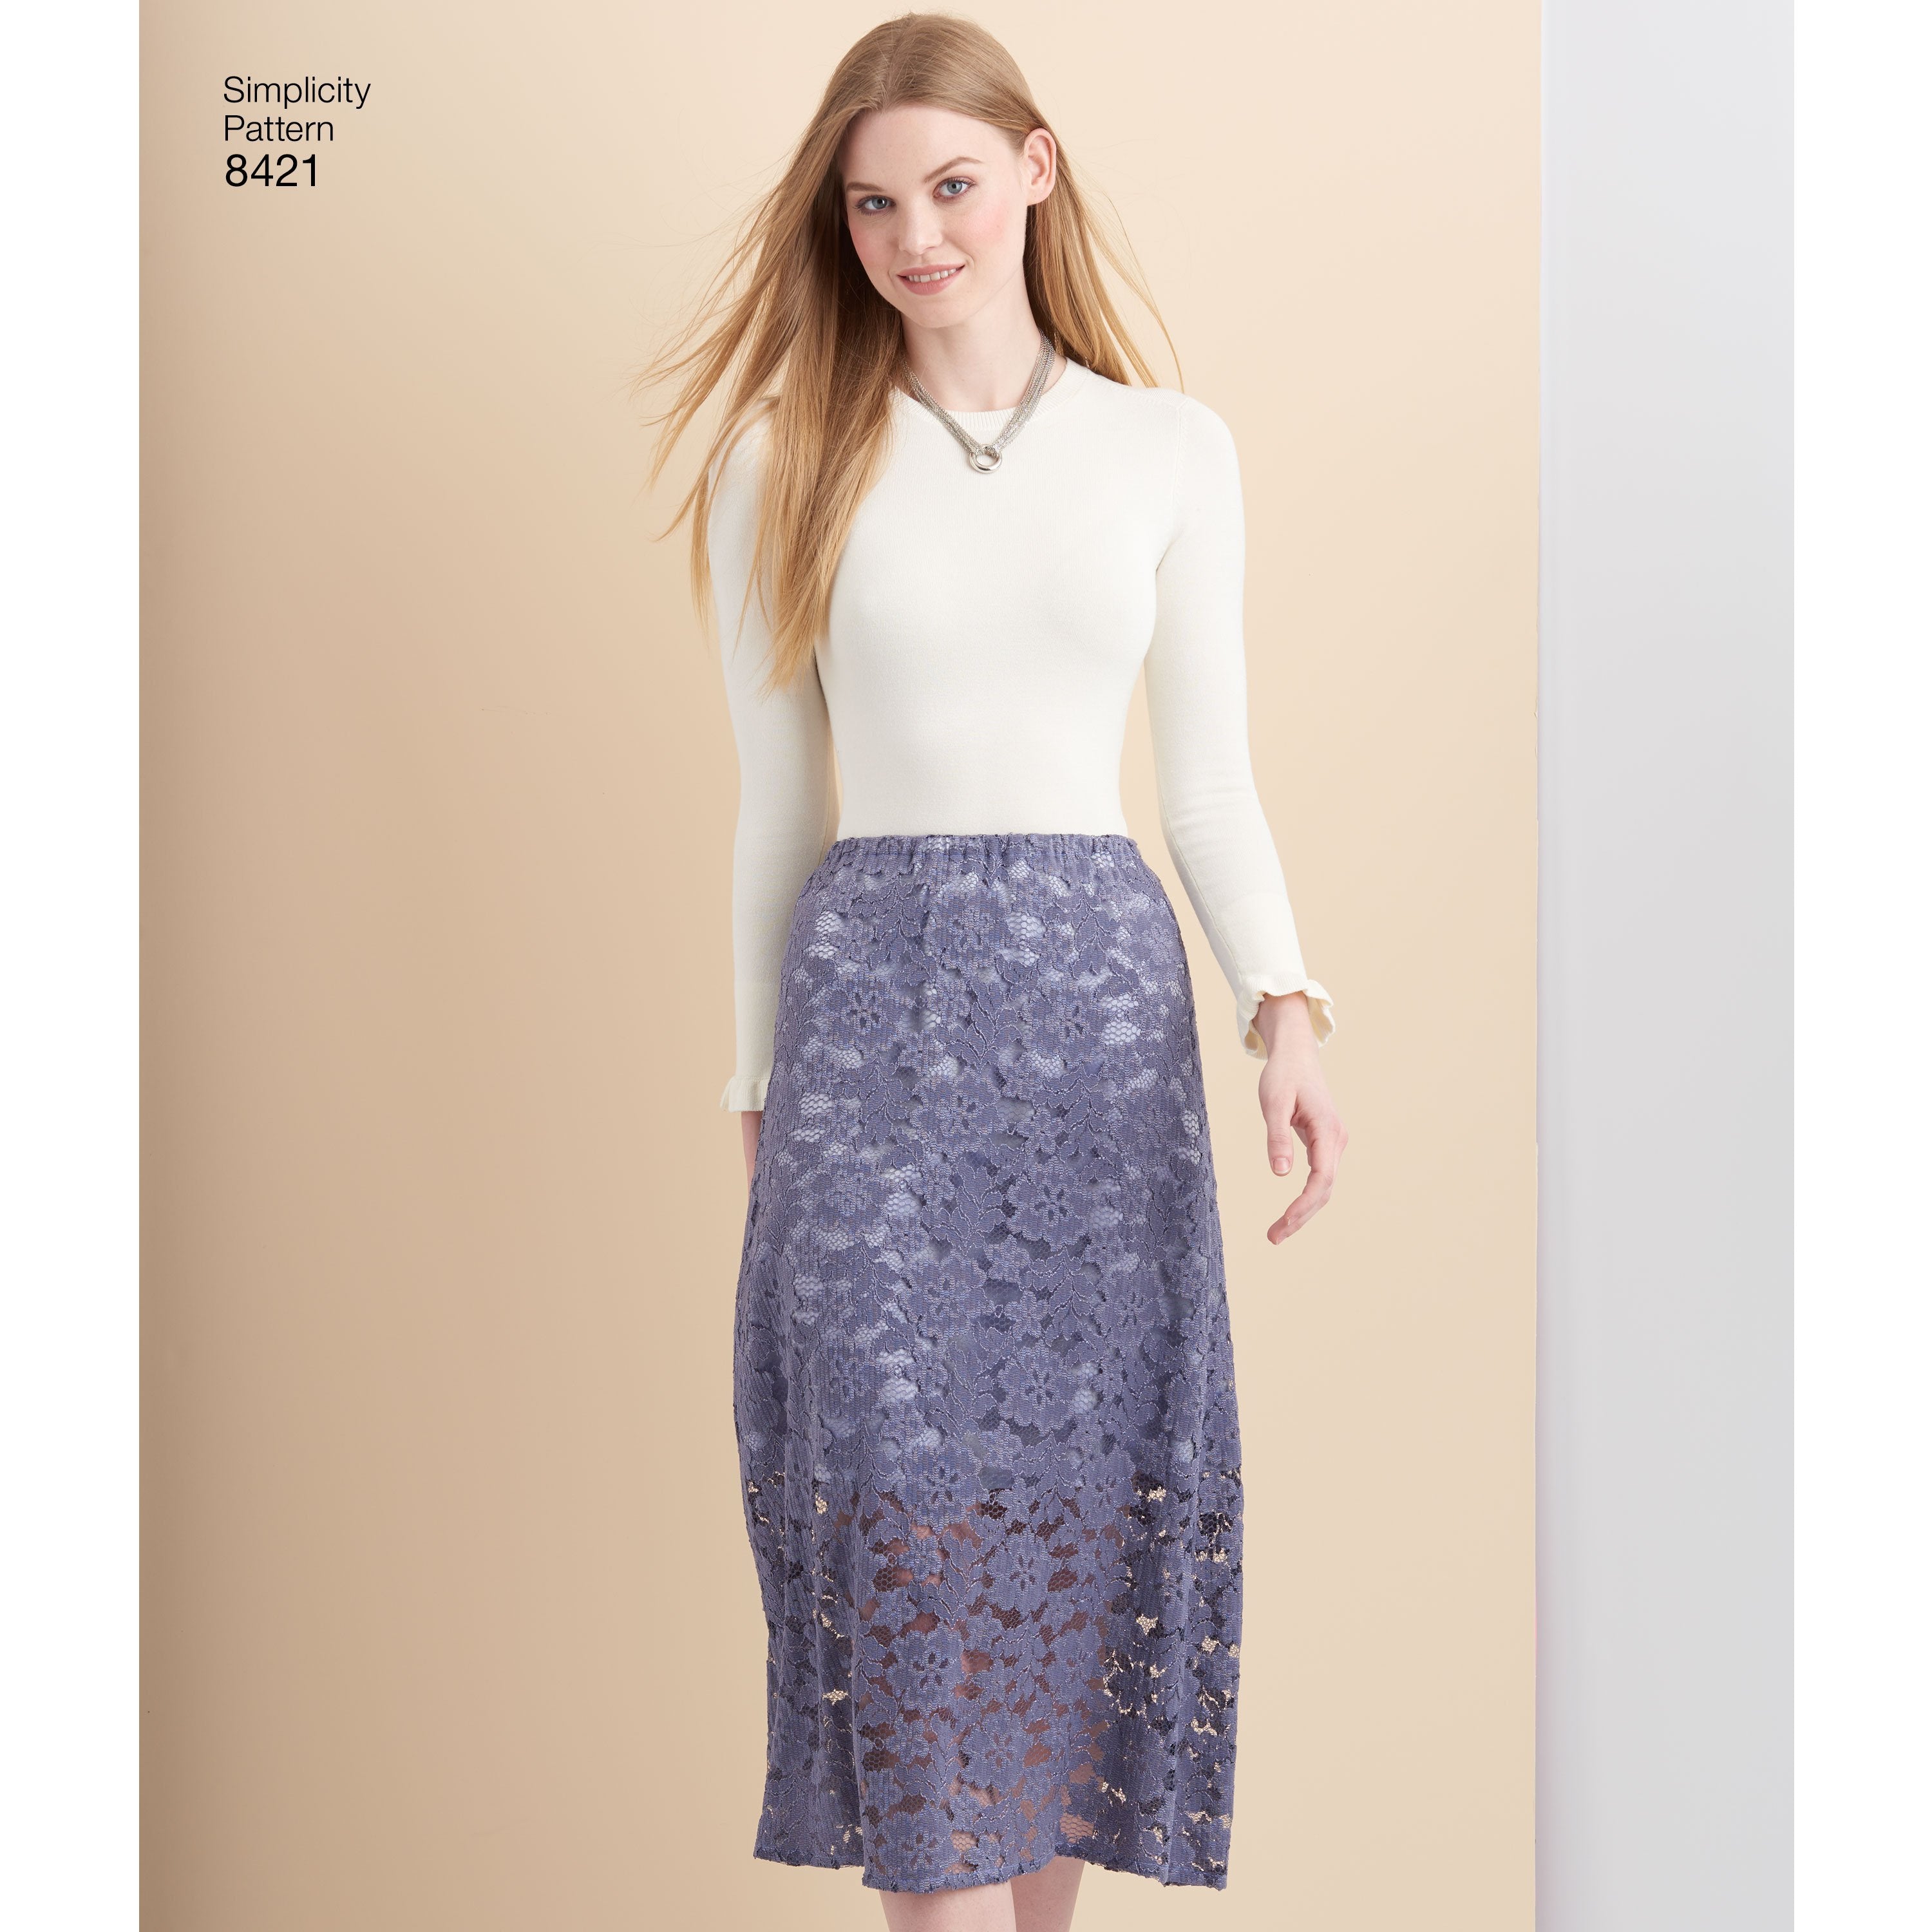 Simplicity Pattern 8421 skirts in three lengths with hem variations from Jaycotts Sewing Supplies